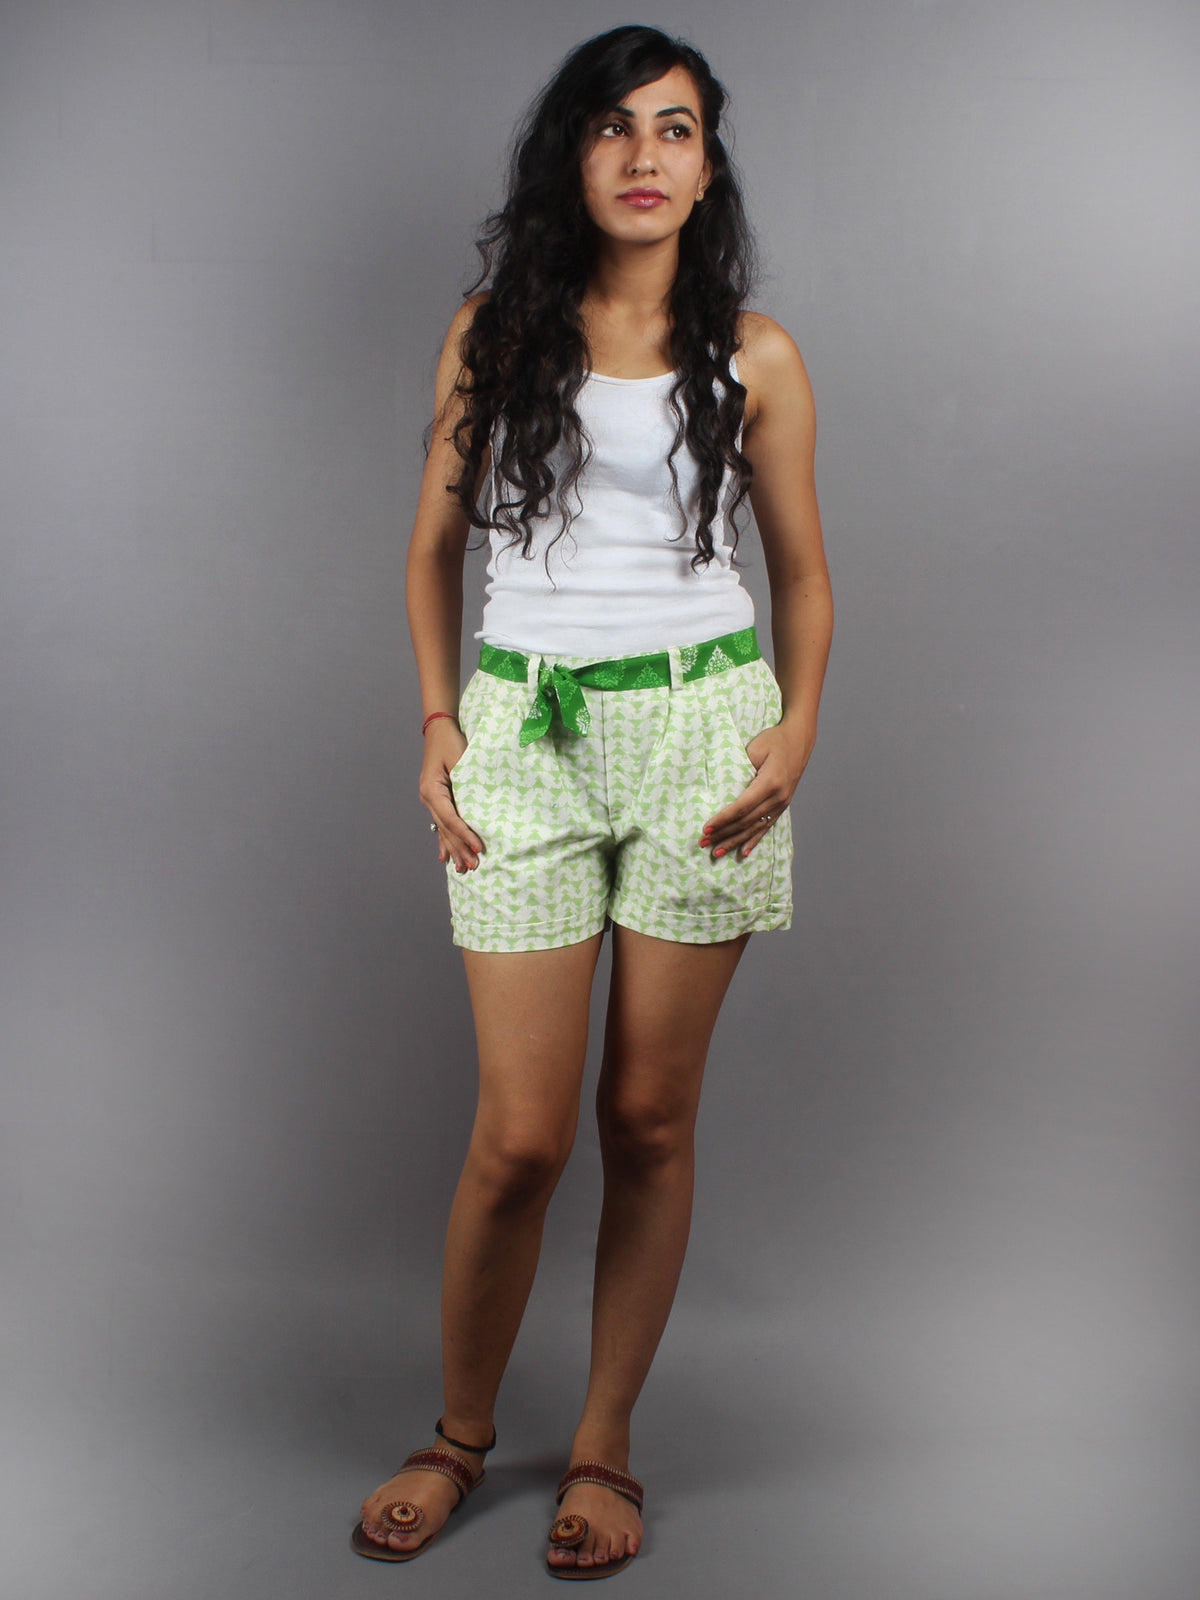 Green Hand Block Printed Shorts With Belt -S5296010